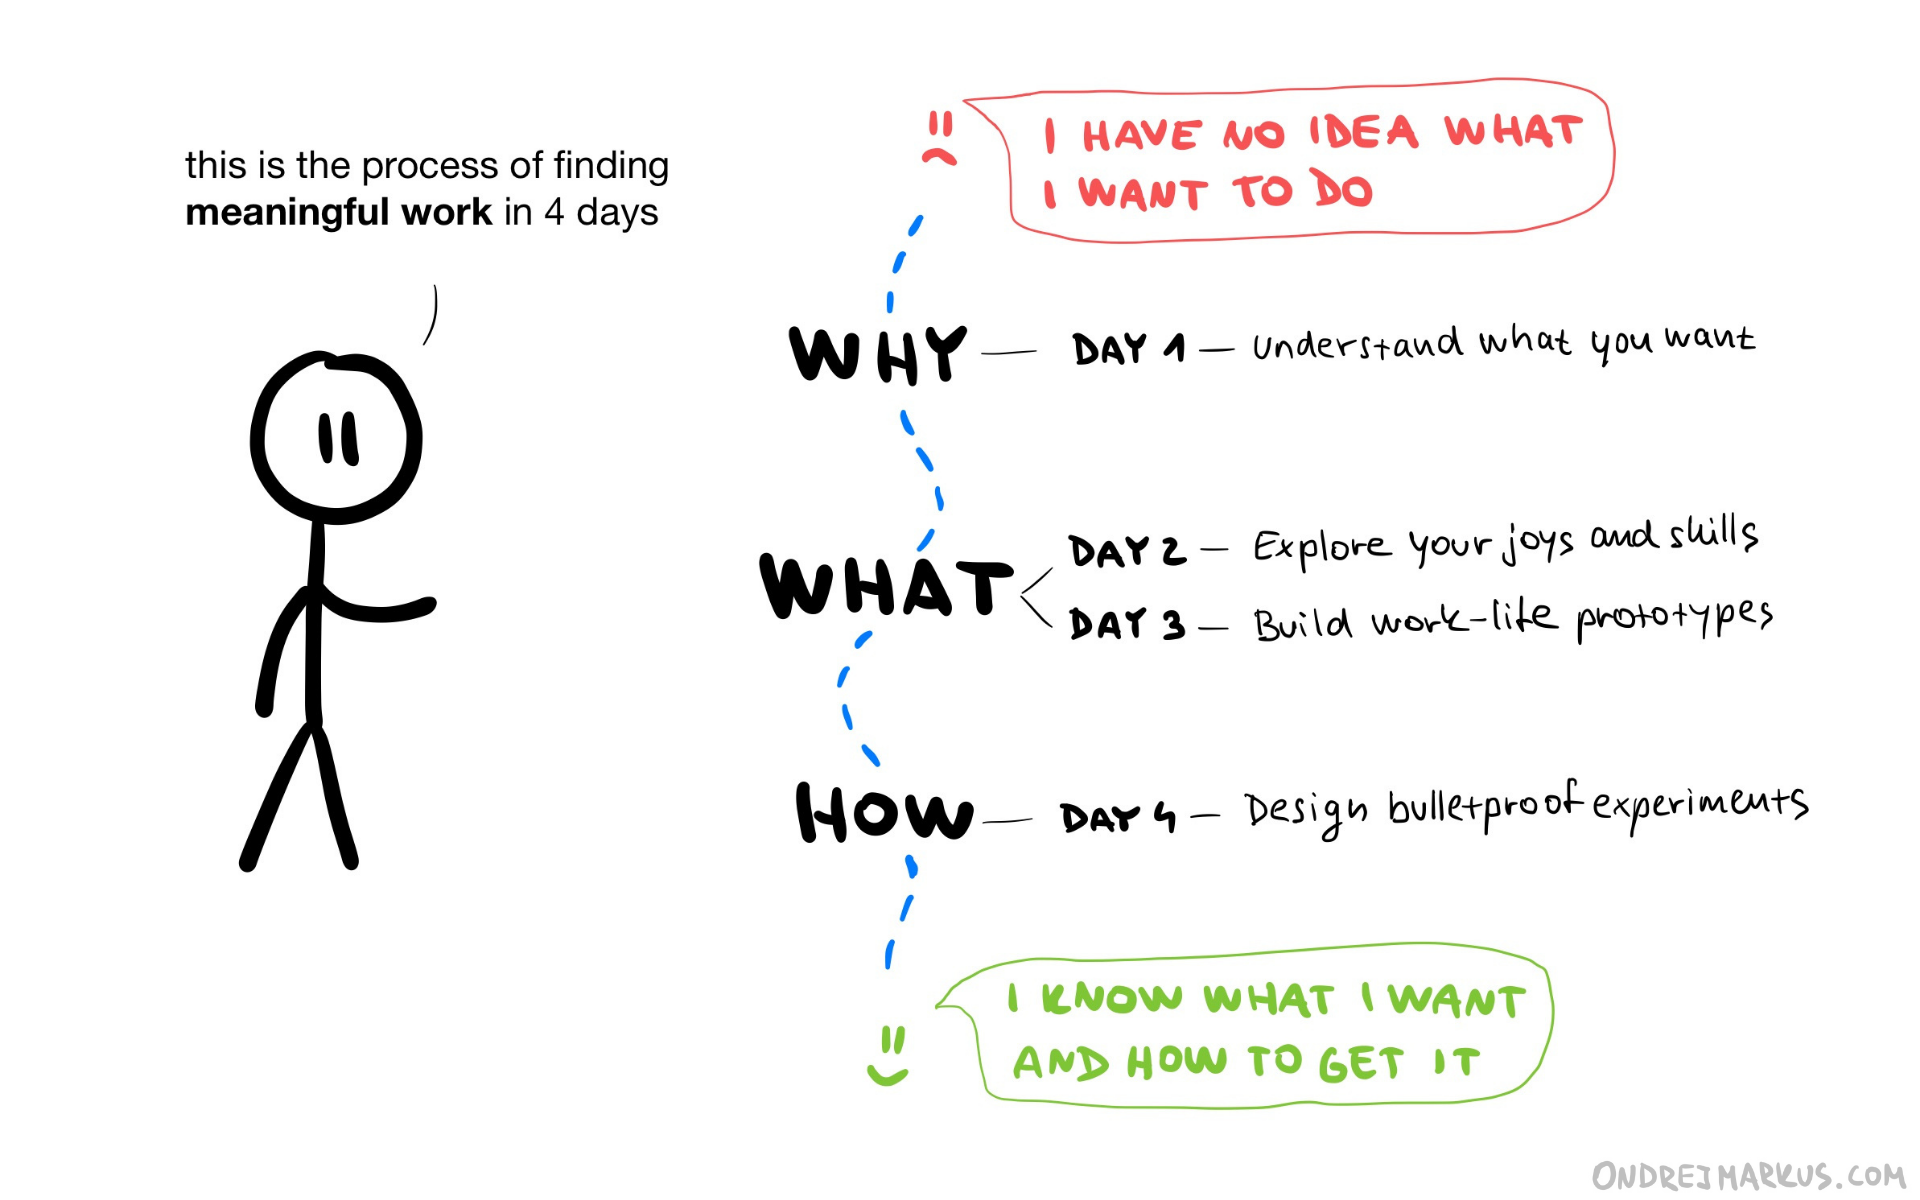 The 4-day process of finding meaningful work